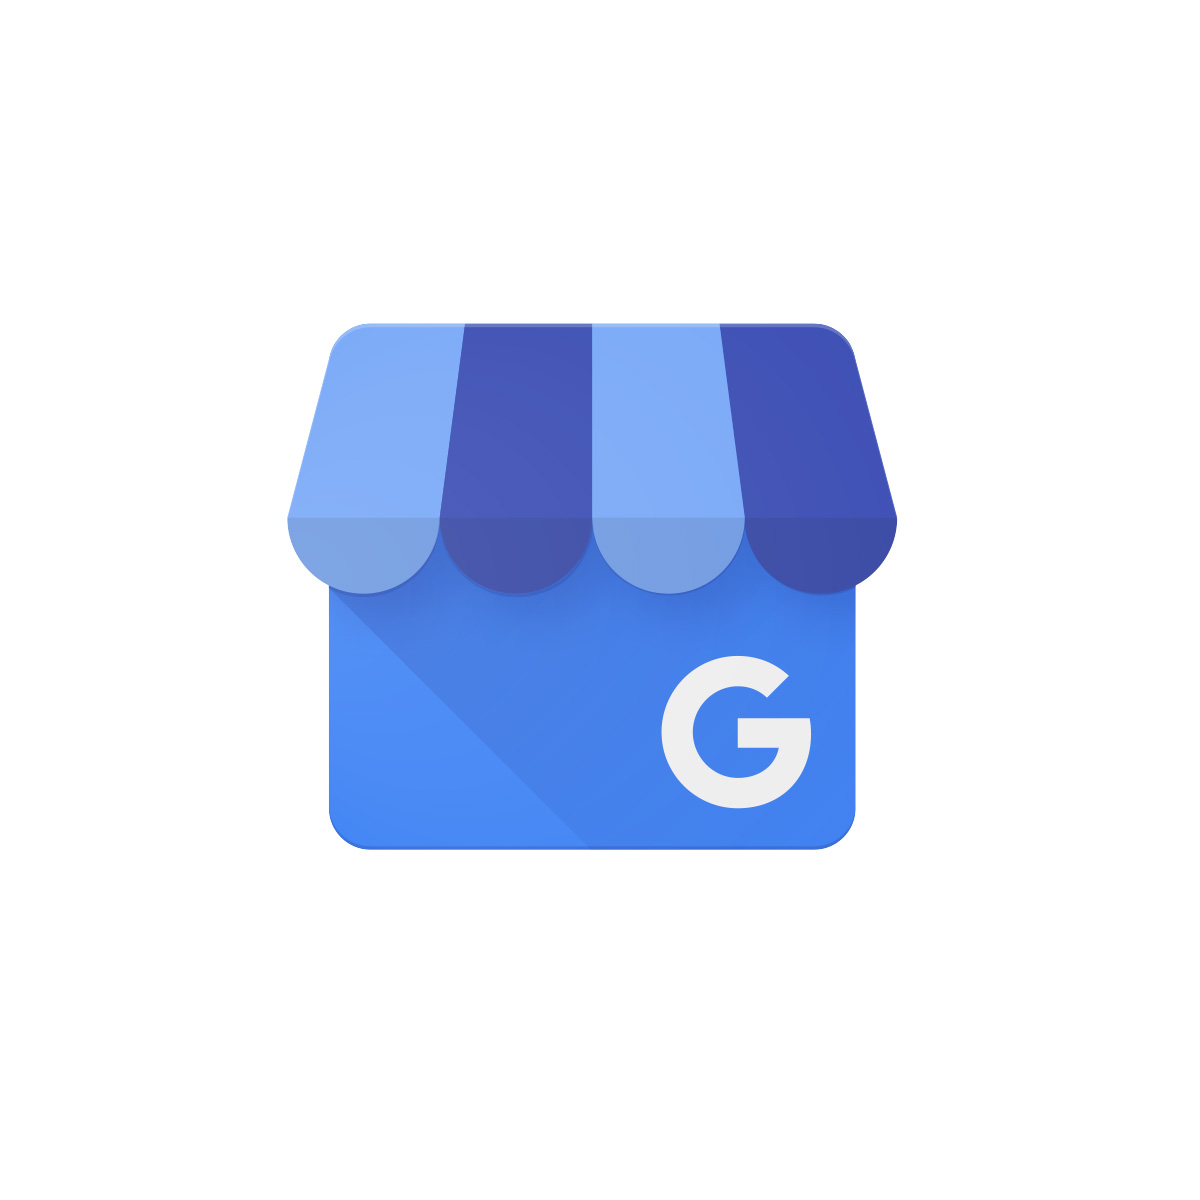 Google My Business: The Ins &